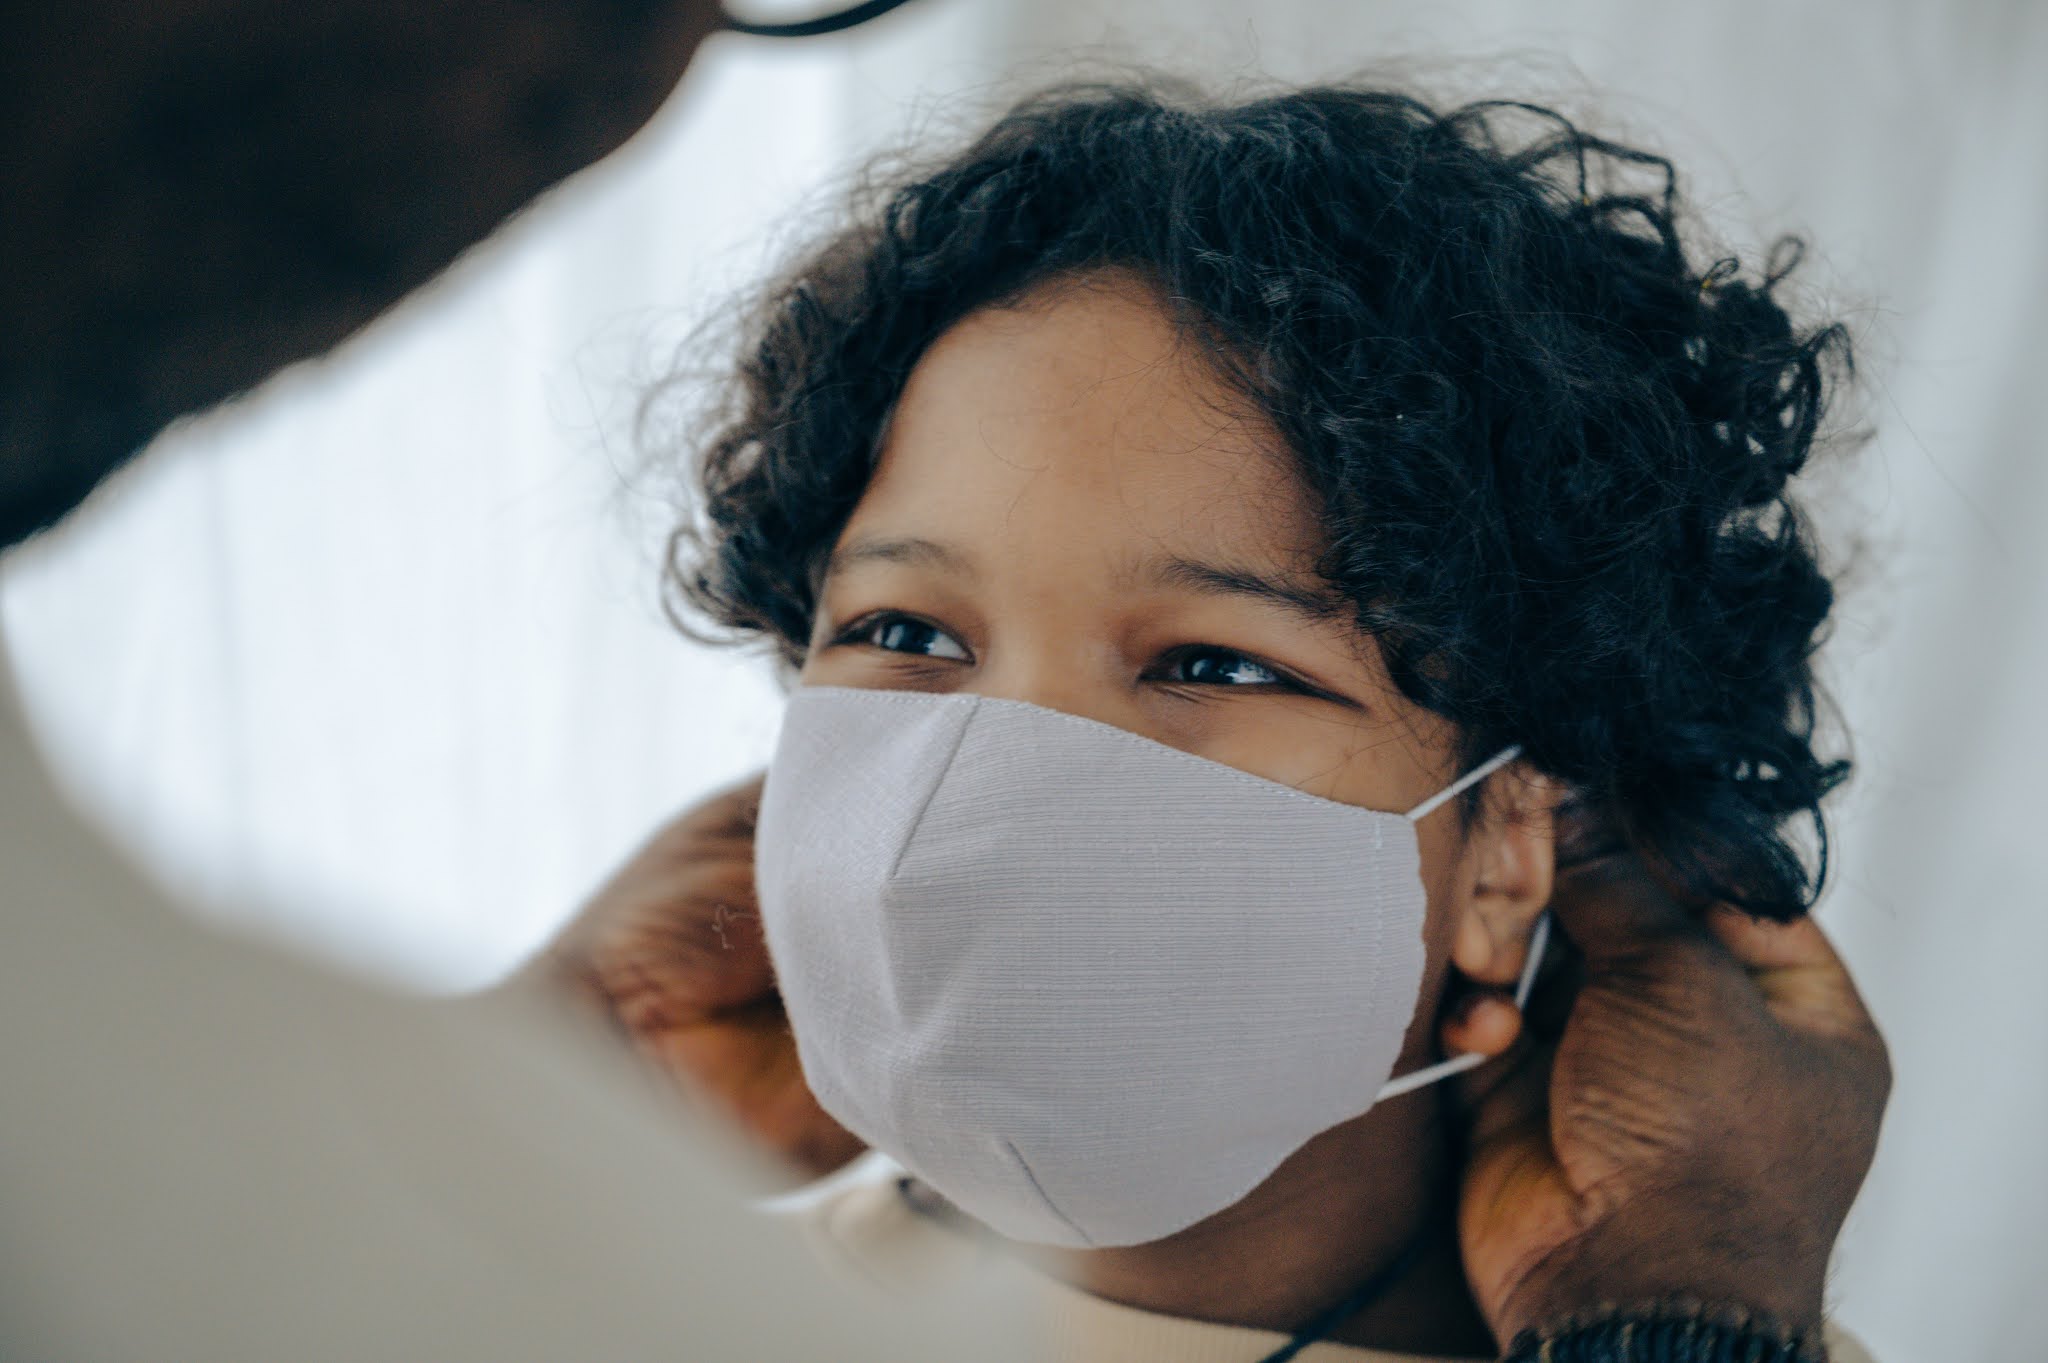 wearing masks as a practical life activity. Photo by Ketut Subiyanto from Pexels.